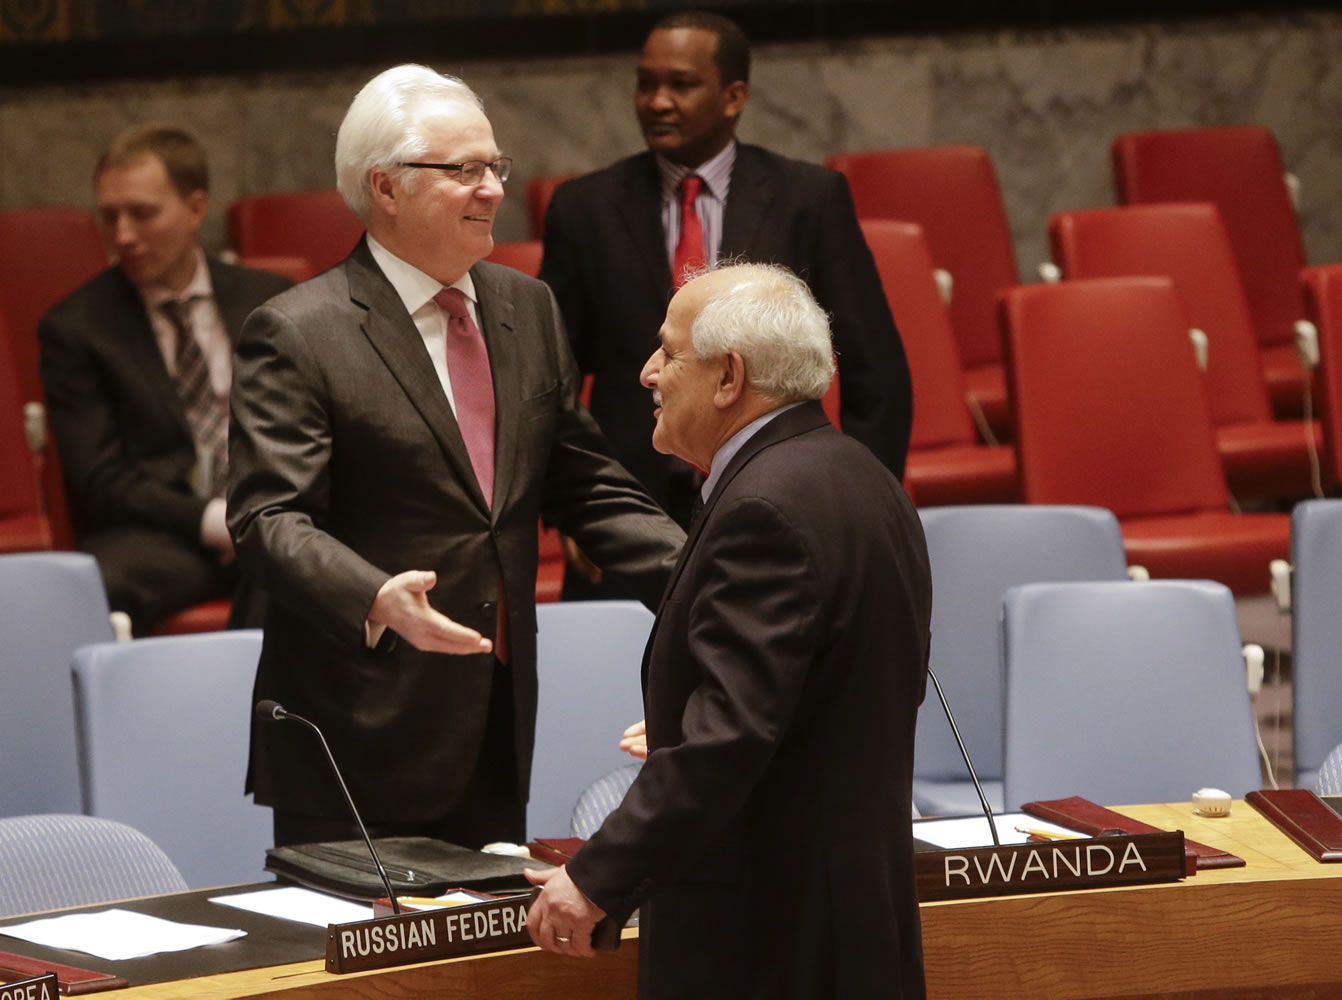 Palestinian Ambassador to the United Nations Riyad Mansour speaks to Russian Foreign Minister Russian Ambassador Vitaly Churkin before a meeting of the U.N.